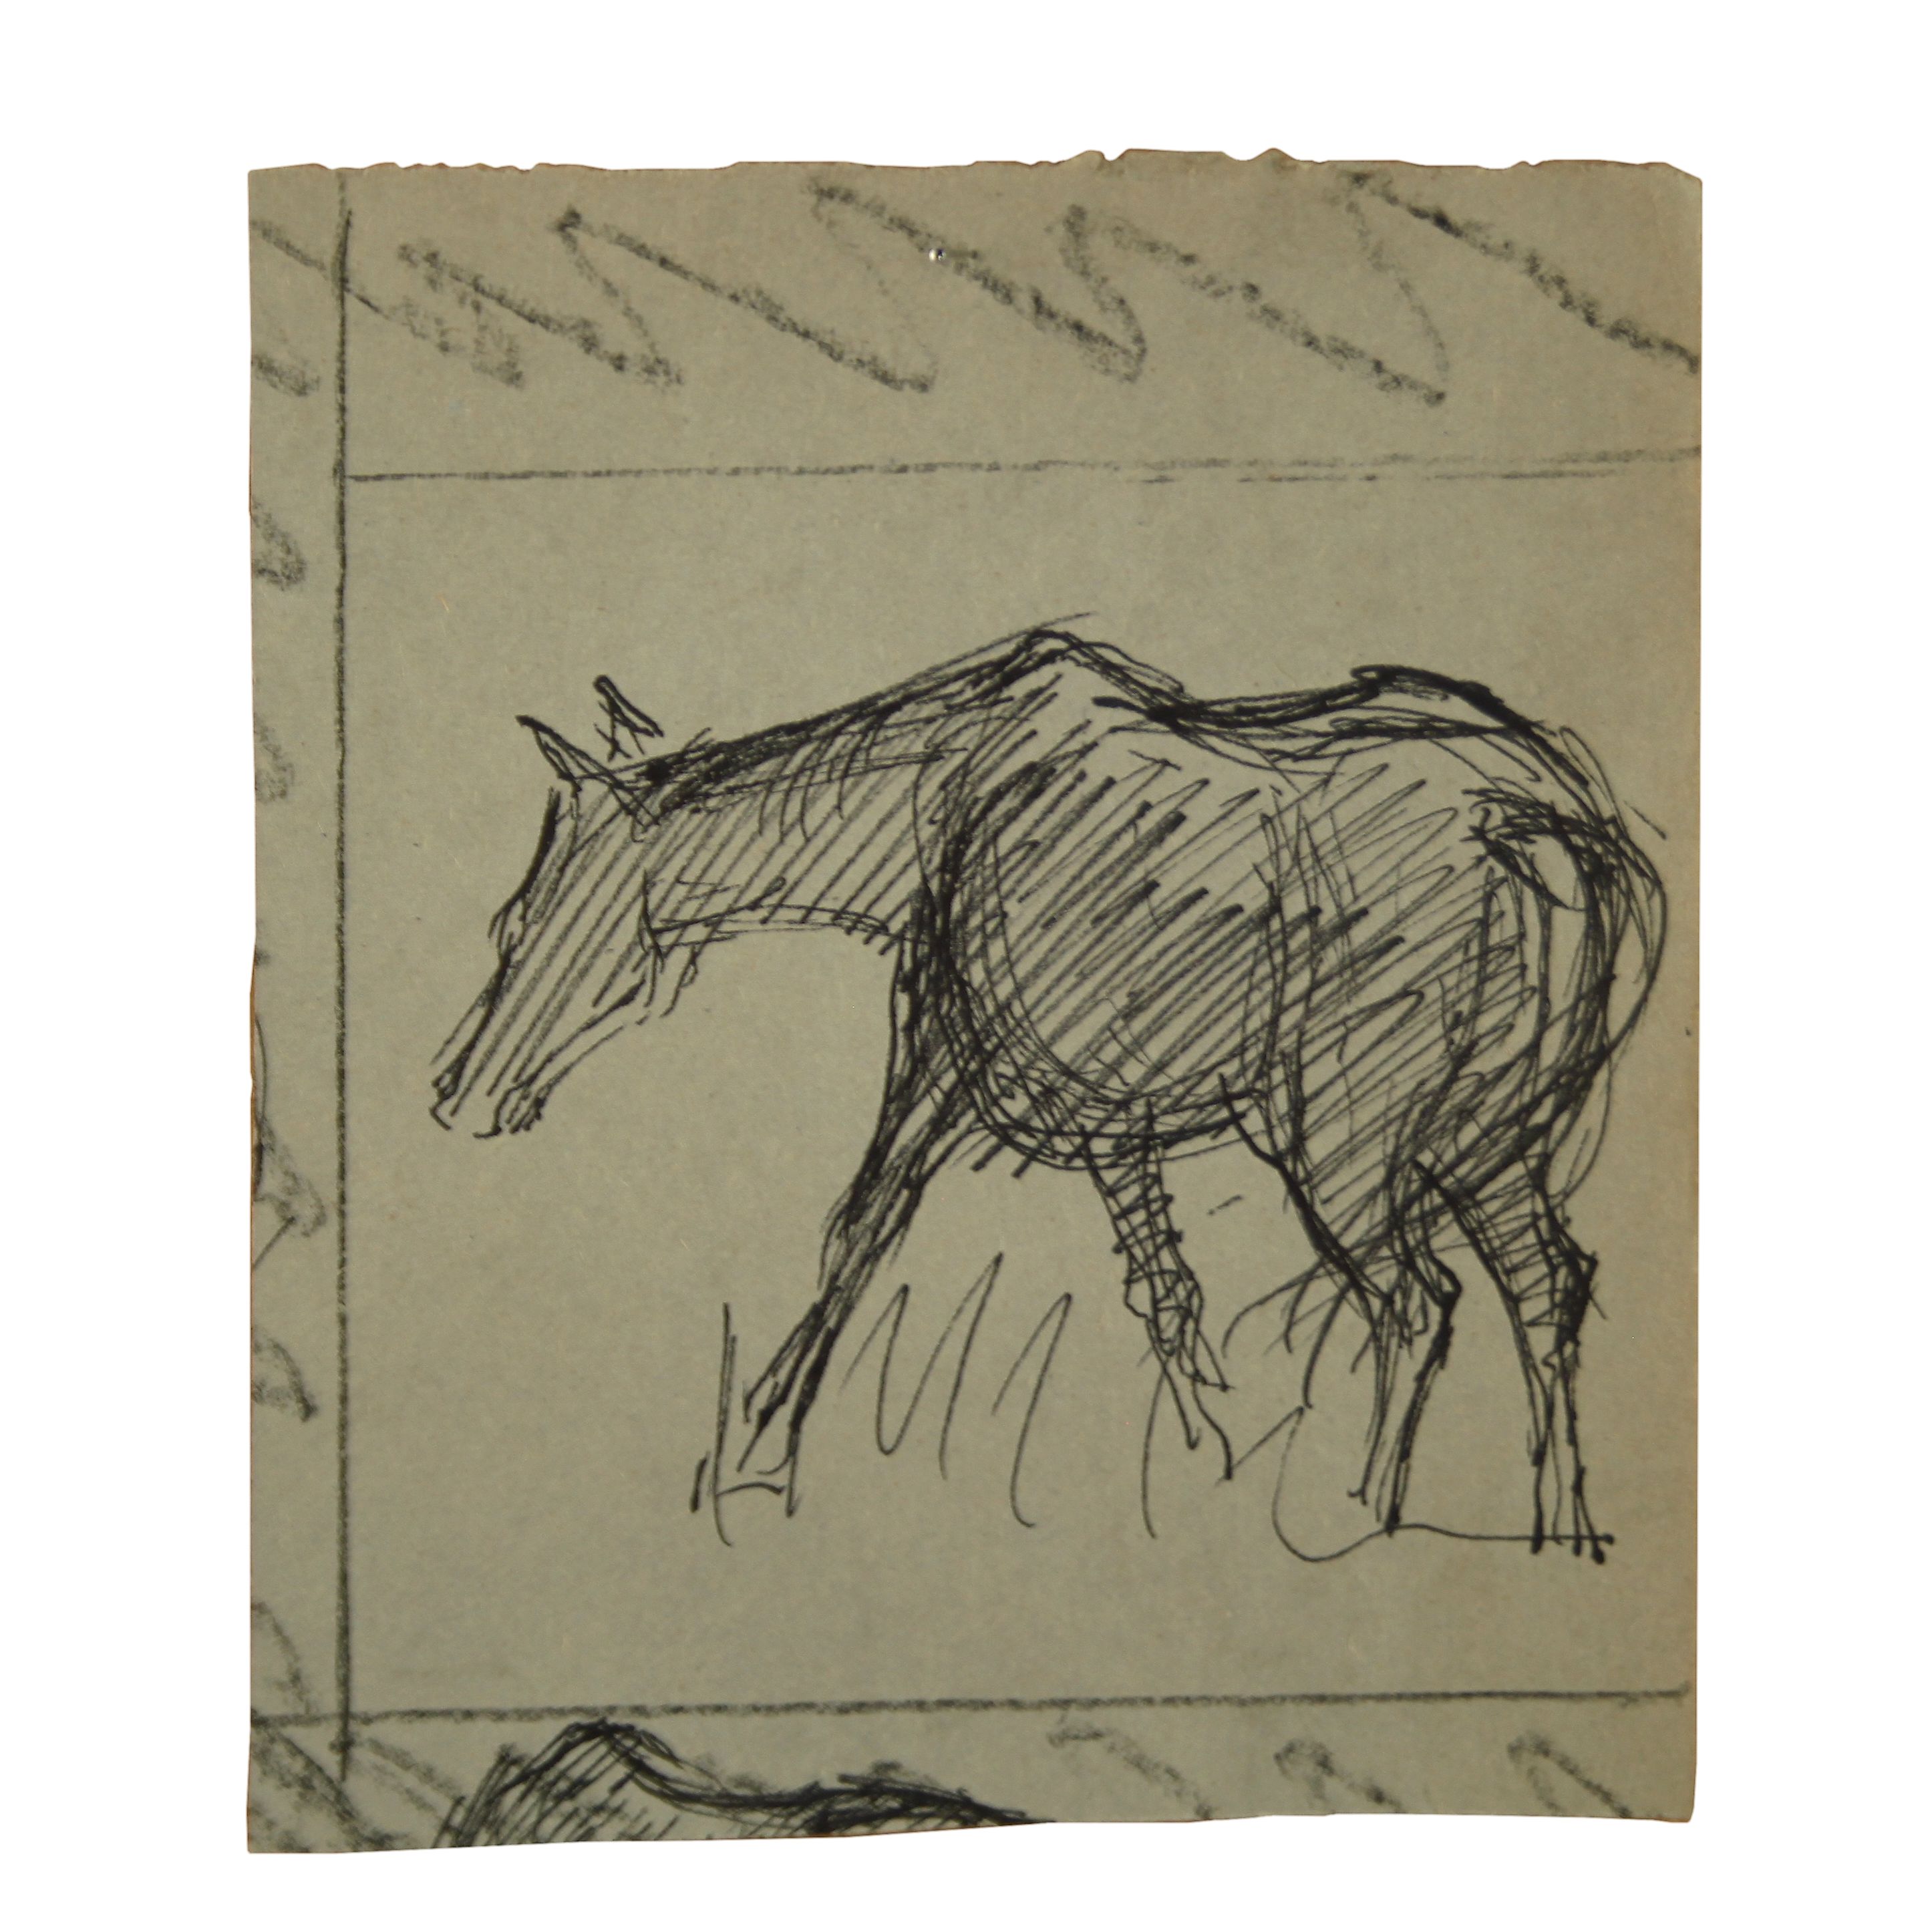 
Old Unframed Retro Pen and Ink Grazing Horse Drawing - Full Image